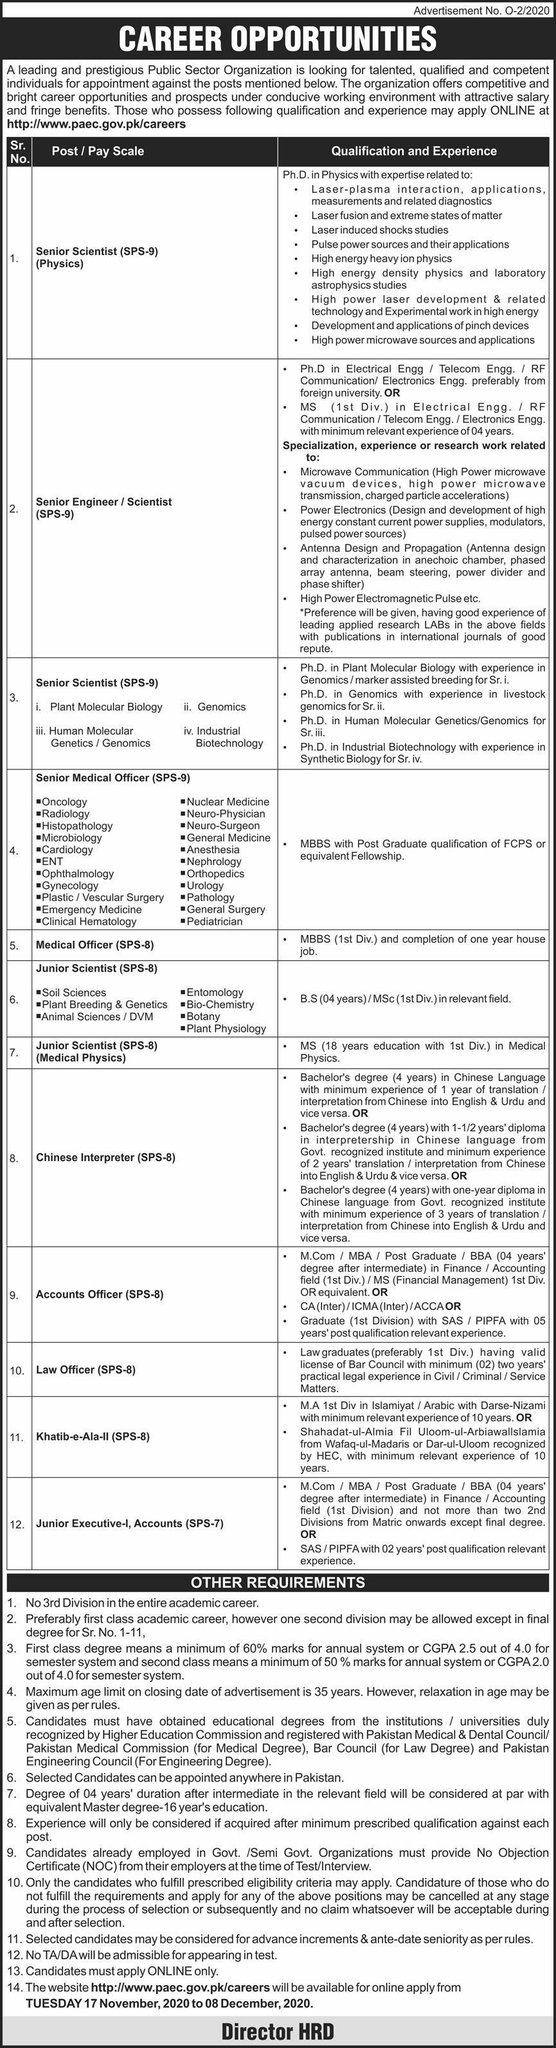 PAEC Jobs November 2020 Apply Online Medical Officers, Scientists & Others Latest Advertisement